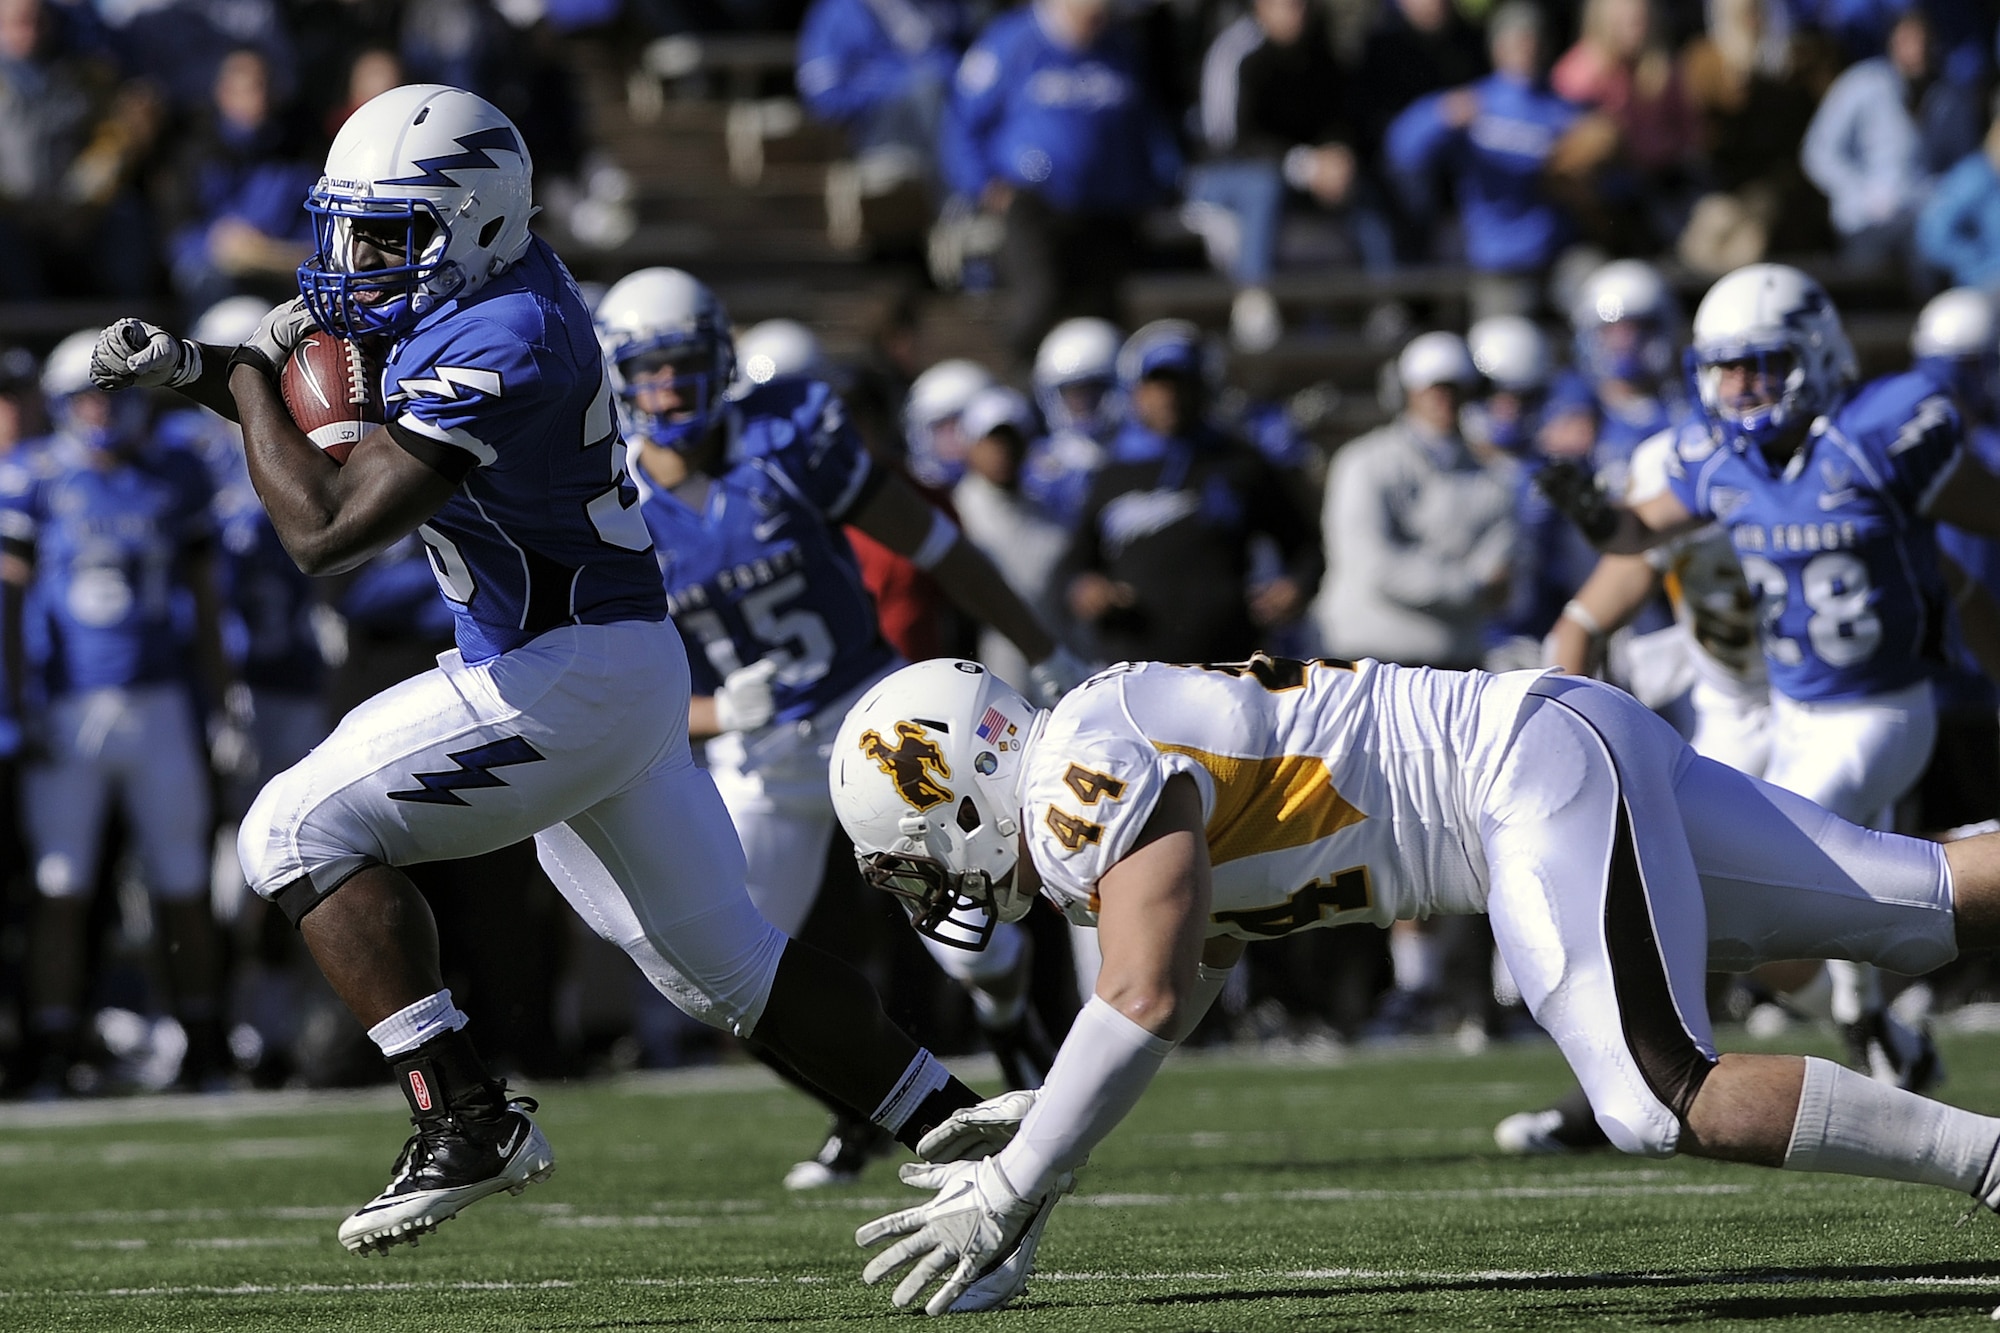 Junior running back Wes Cobb breaks free for yardage against the Wyoming Cowboys at Falcon Stadium Nov. 12, 2011, in Colorado Springs, Colo. The Cowboys defeated Air Force 25-17.    (U.S. Air Force photo/Mike Kaplan)